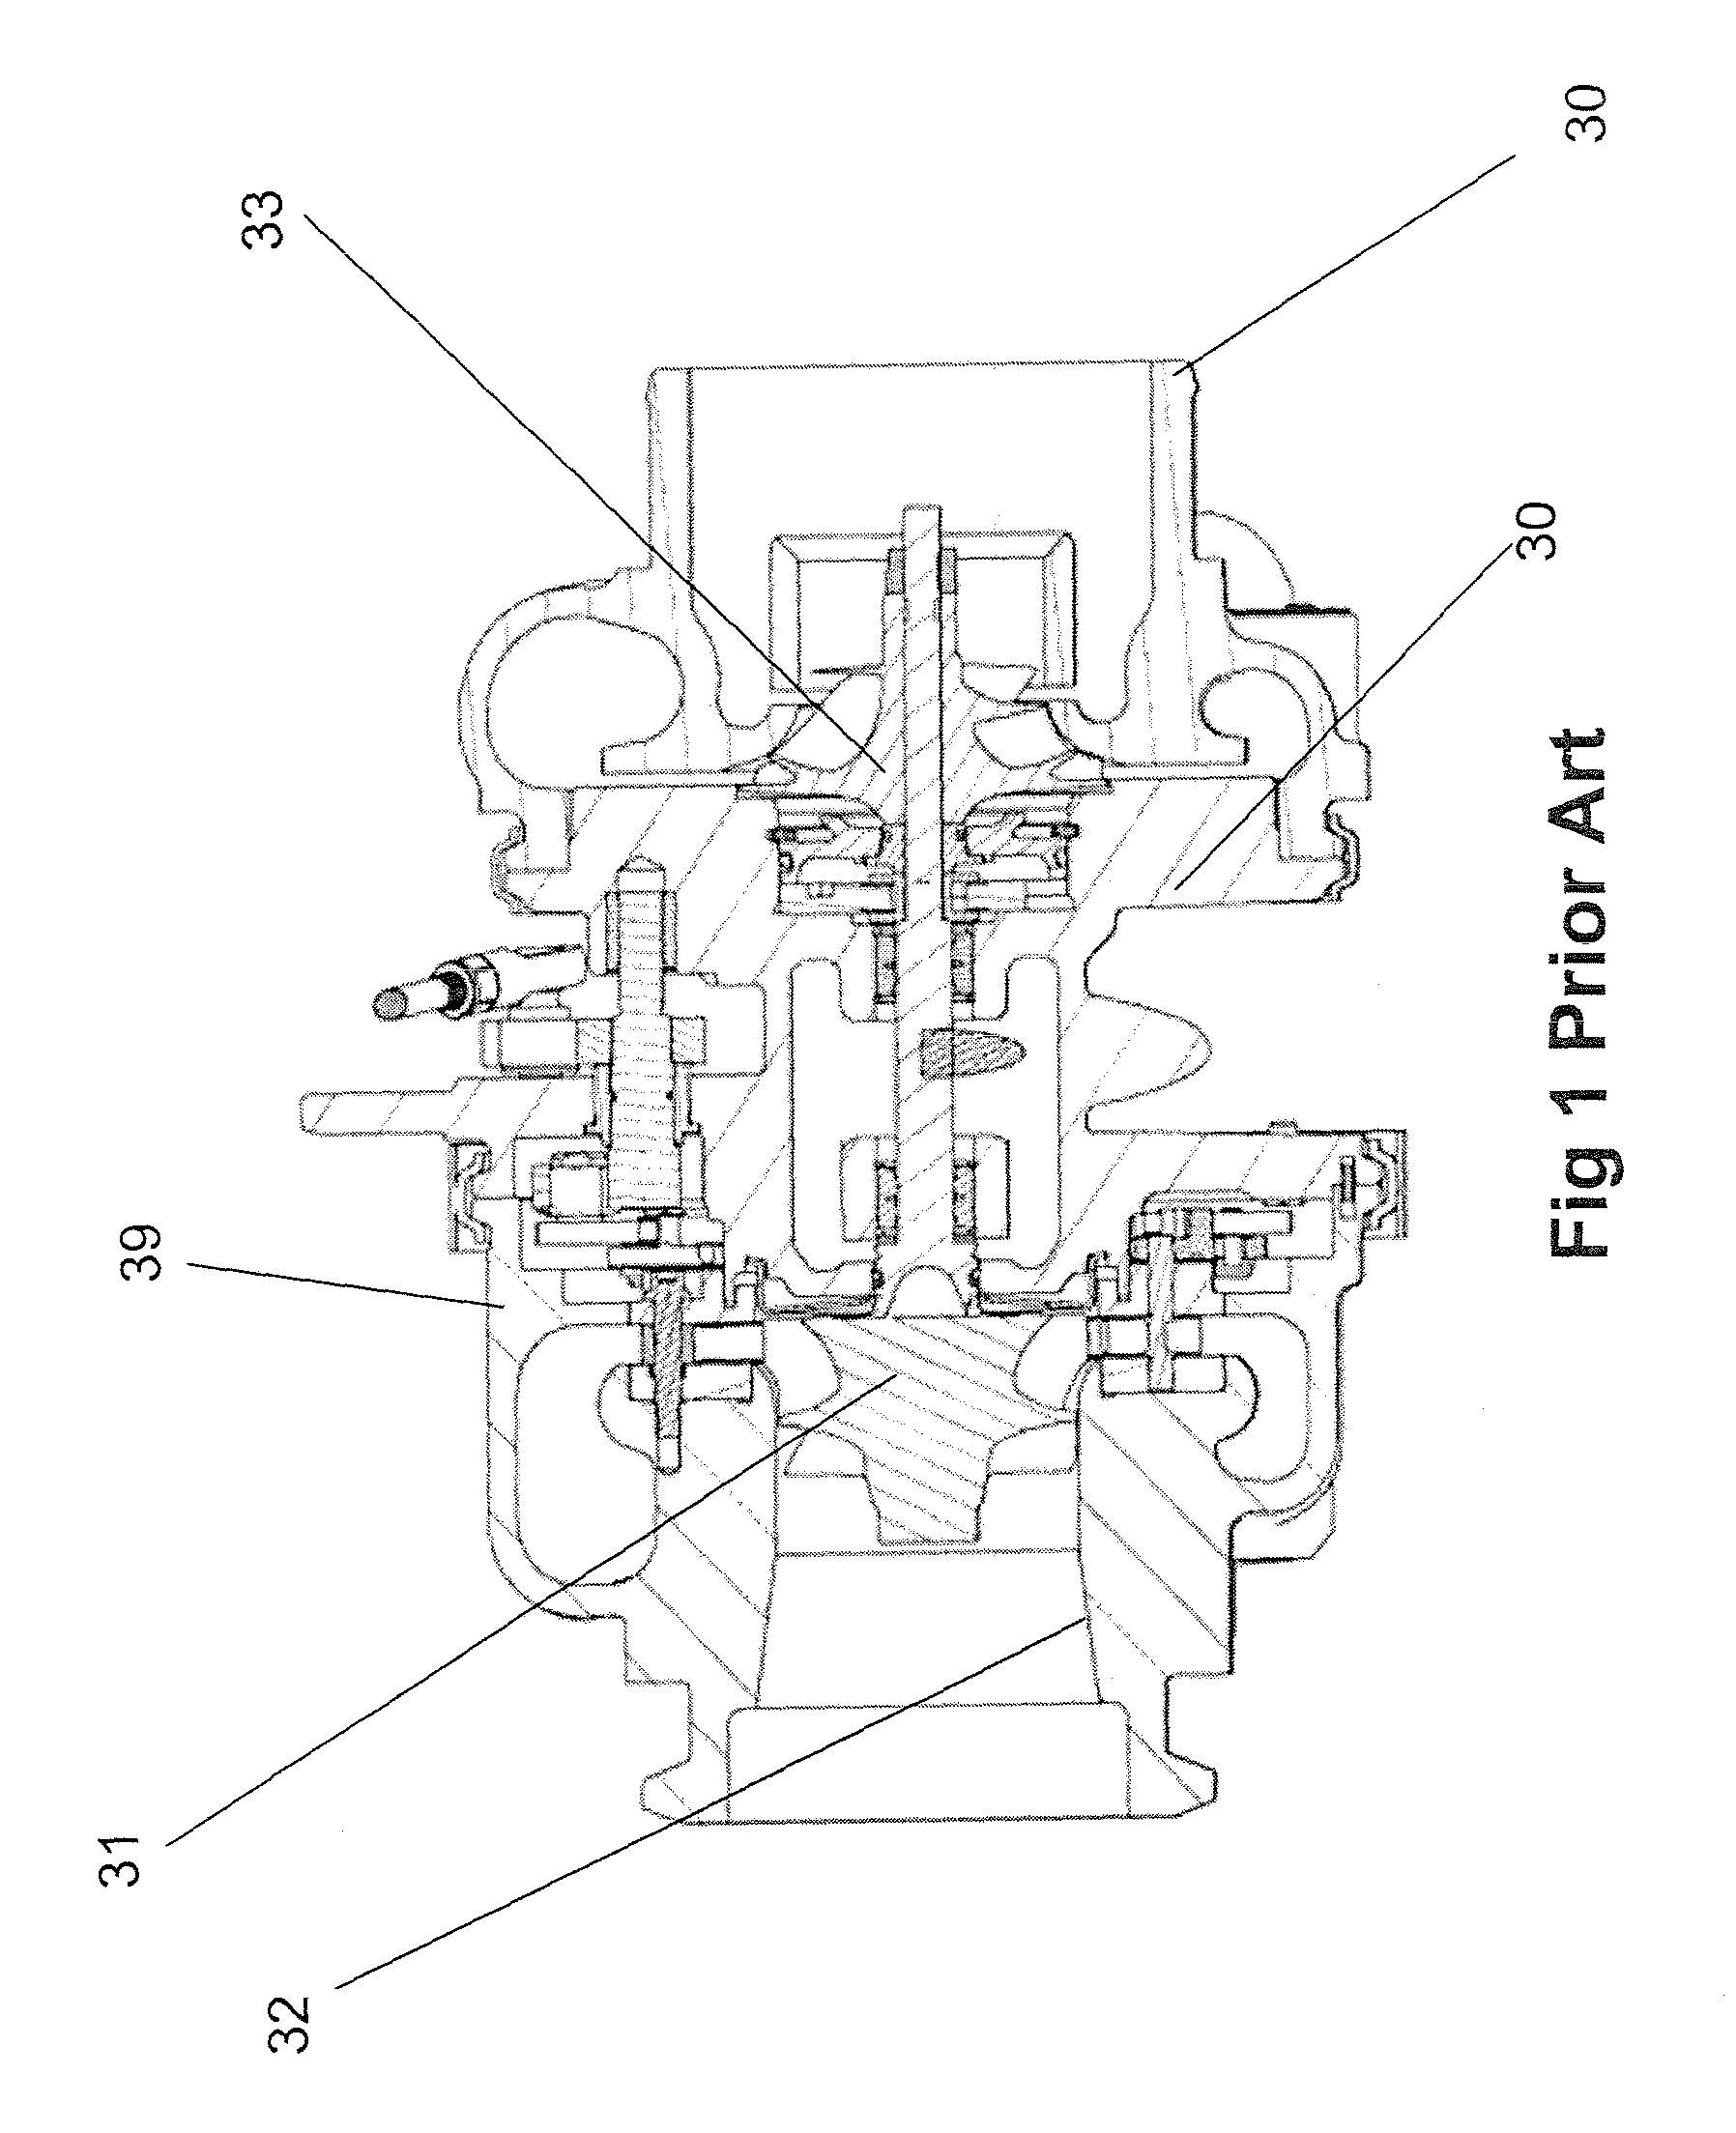 Thermatically operated bypass valve for passive warmup control of aftertreatment device